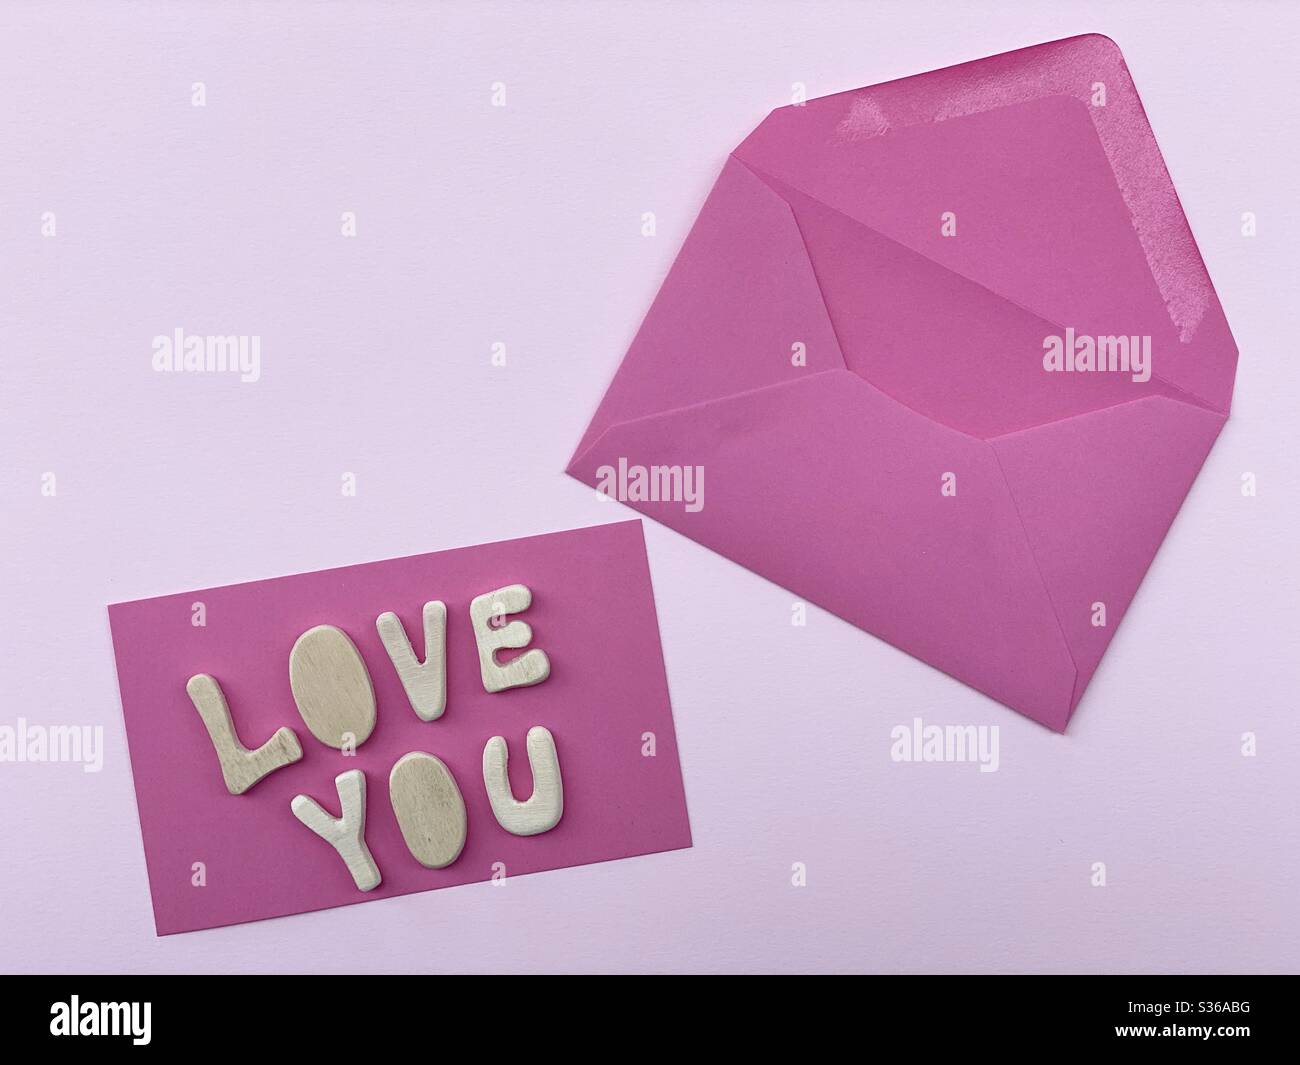 Love you message composed with handmade wooden letters on a pink card Stock Photo